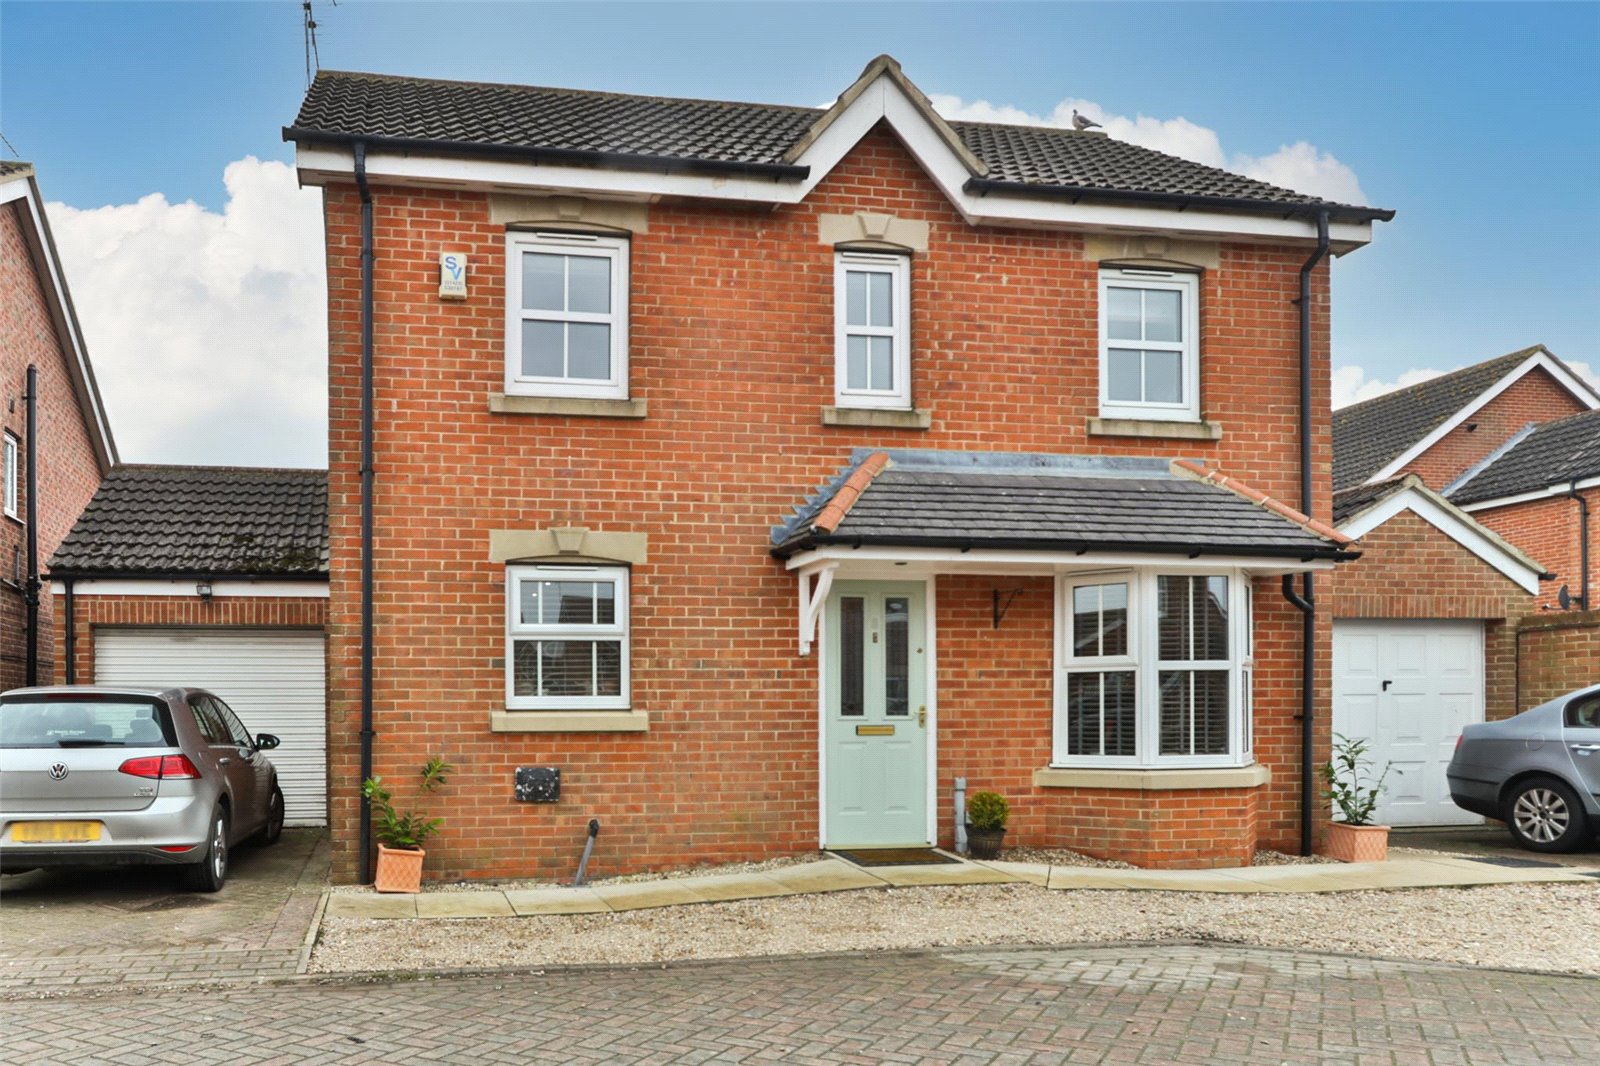 4 bed house for sale in Appletree Close, Long Riston 0